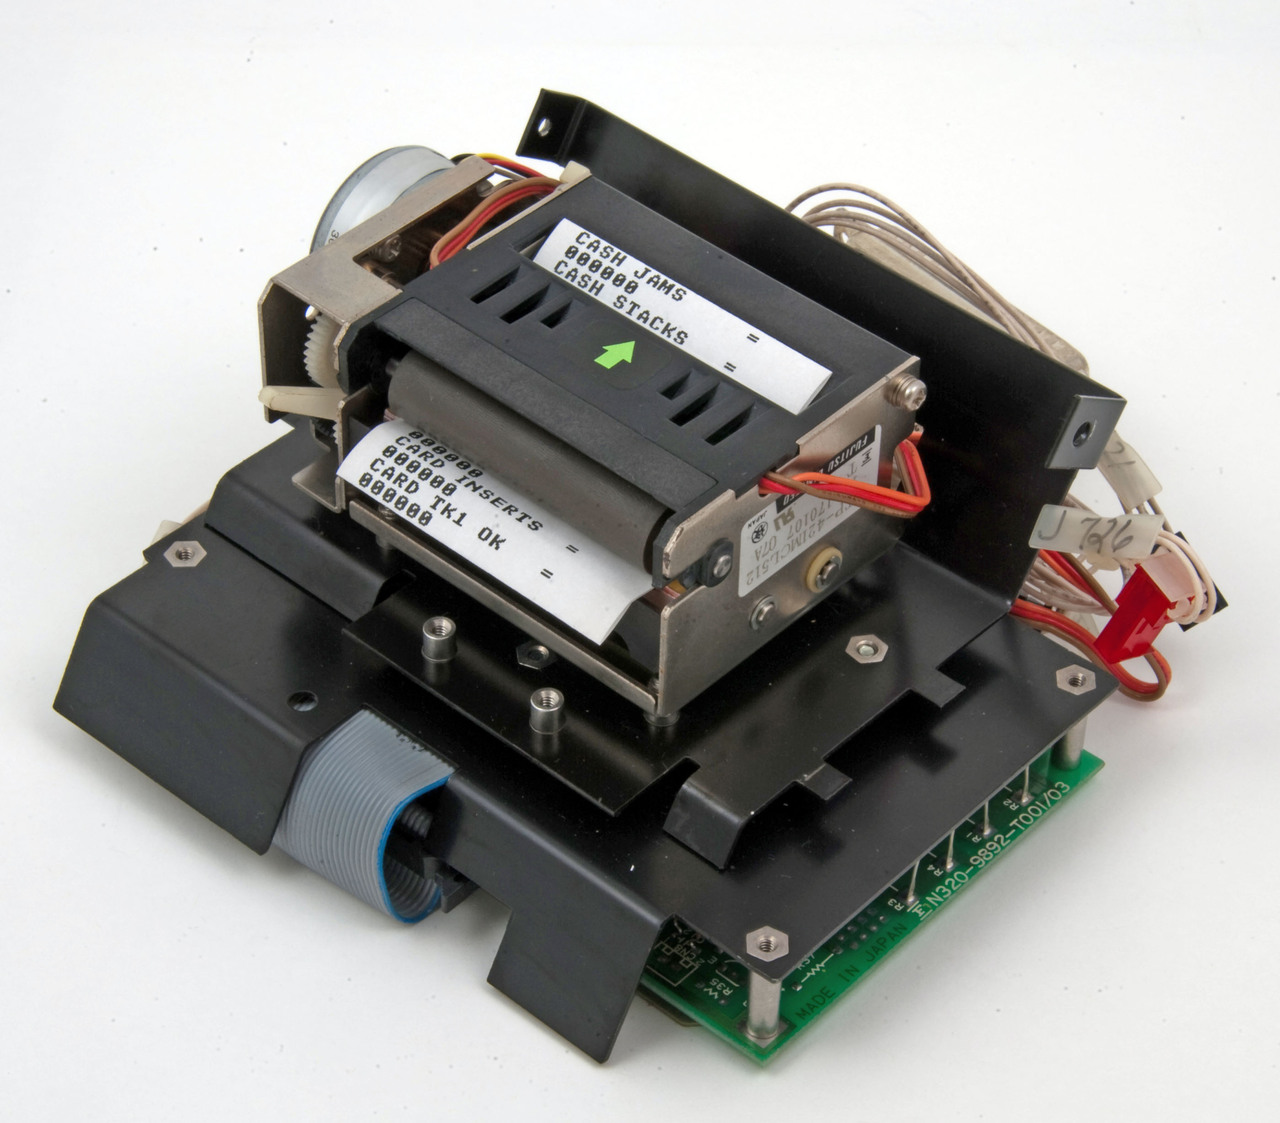 CRIND PRINTER WITH DRIVER BOARD, Fits Gilbarco Image